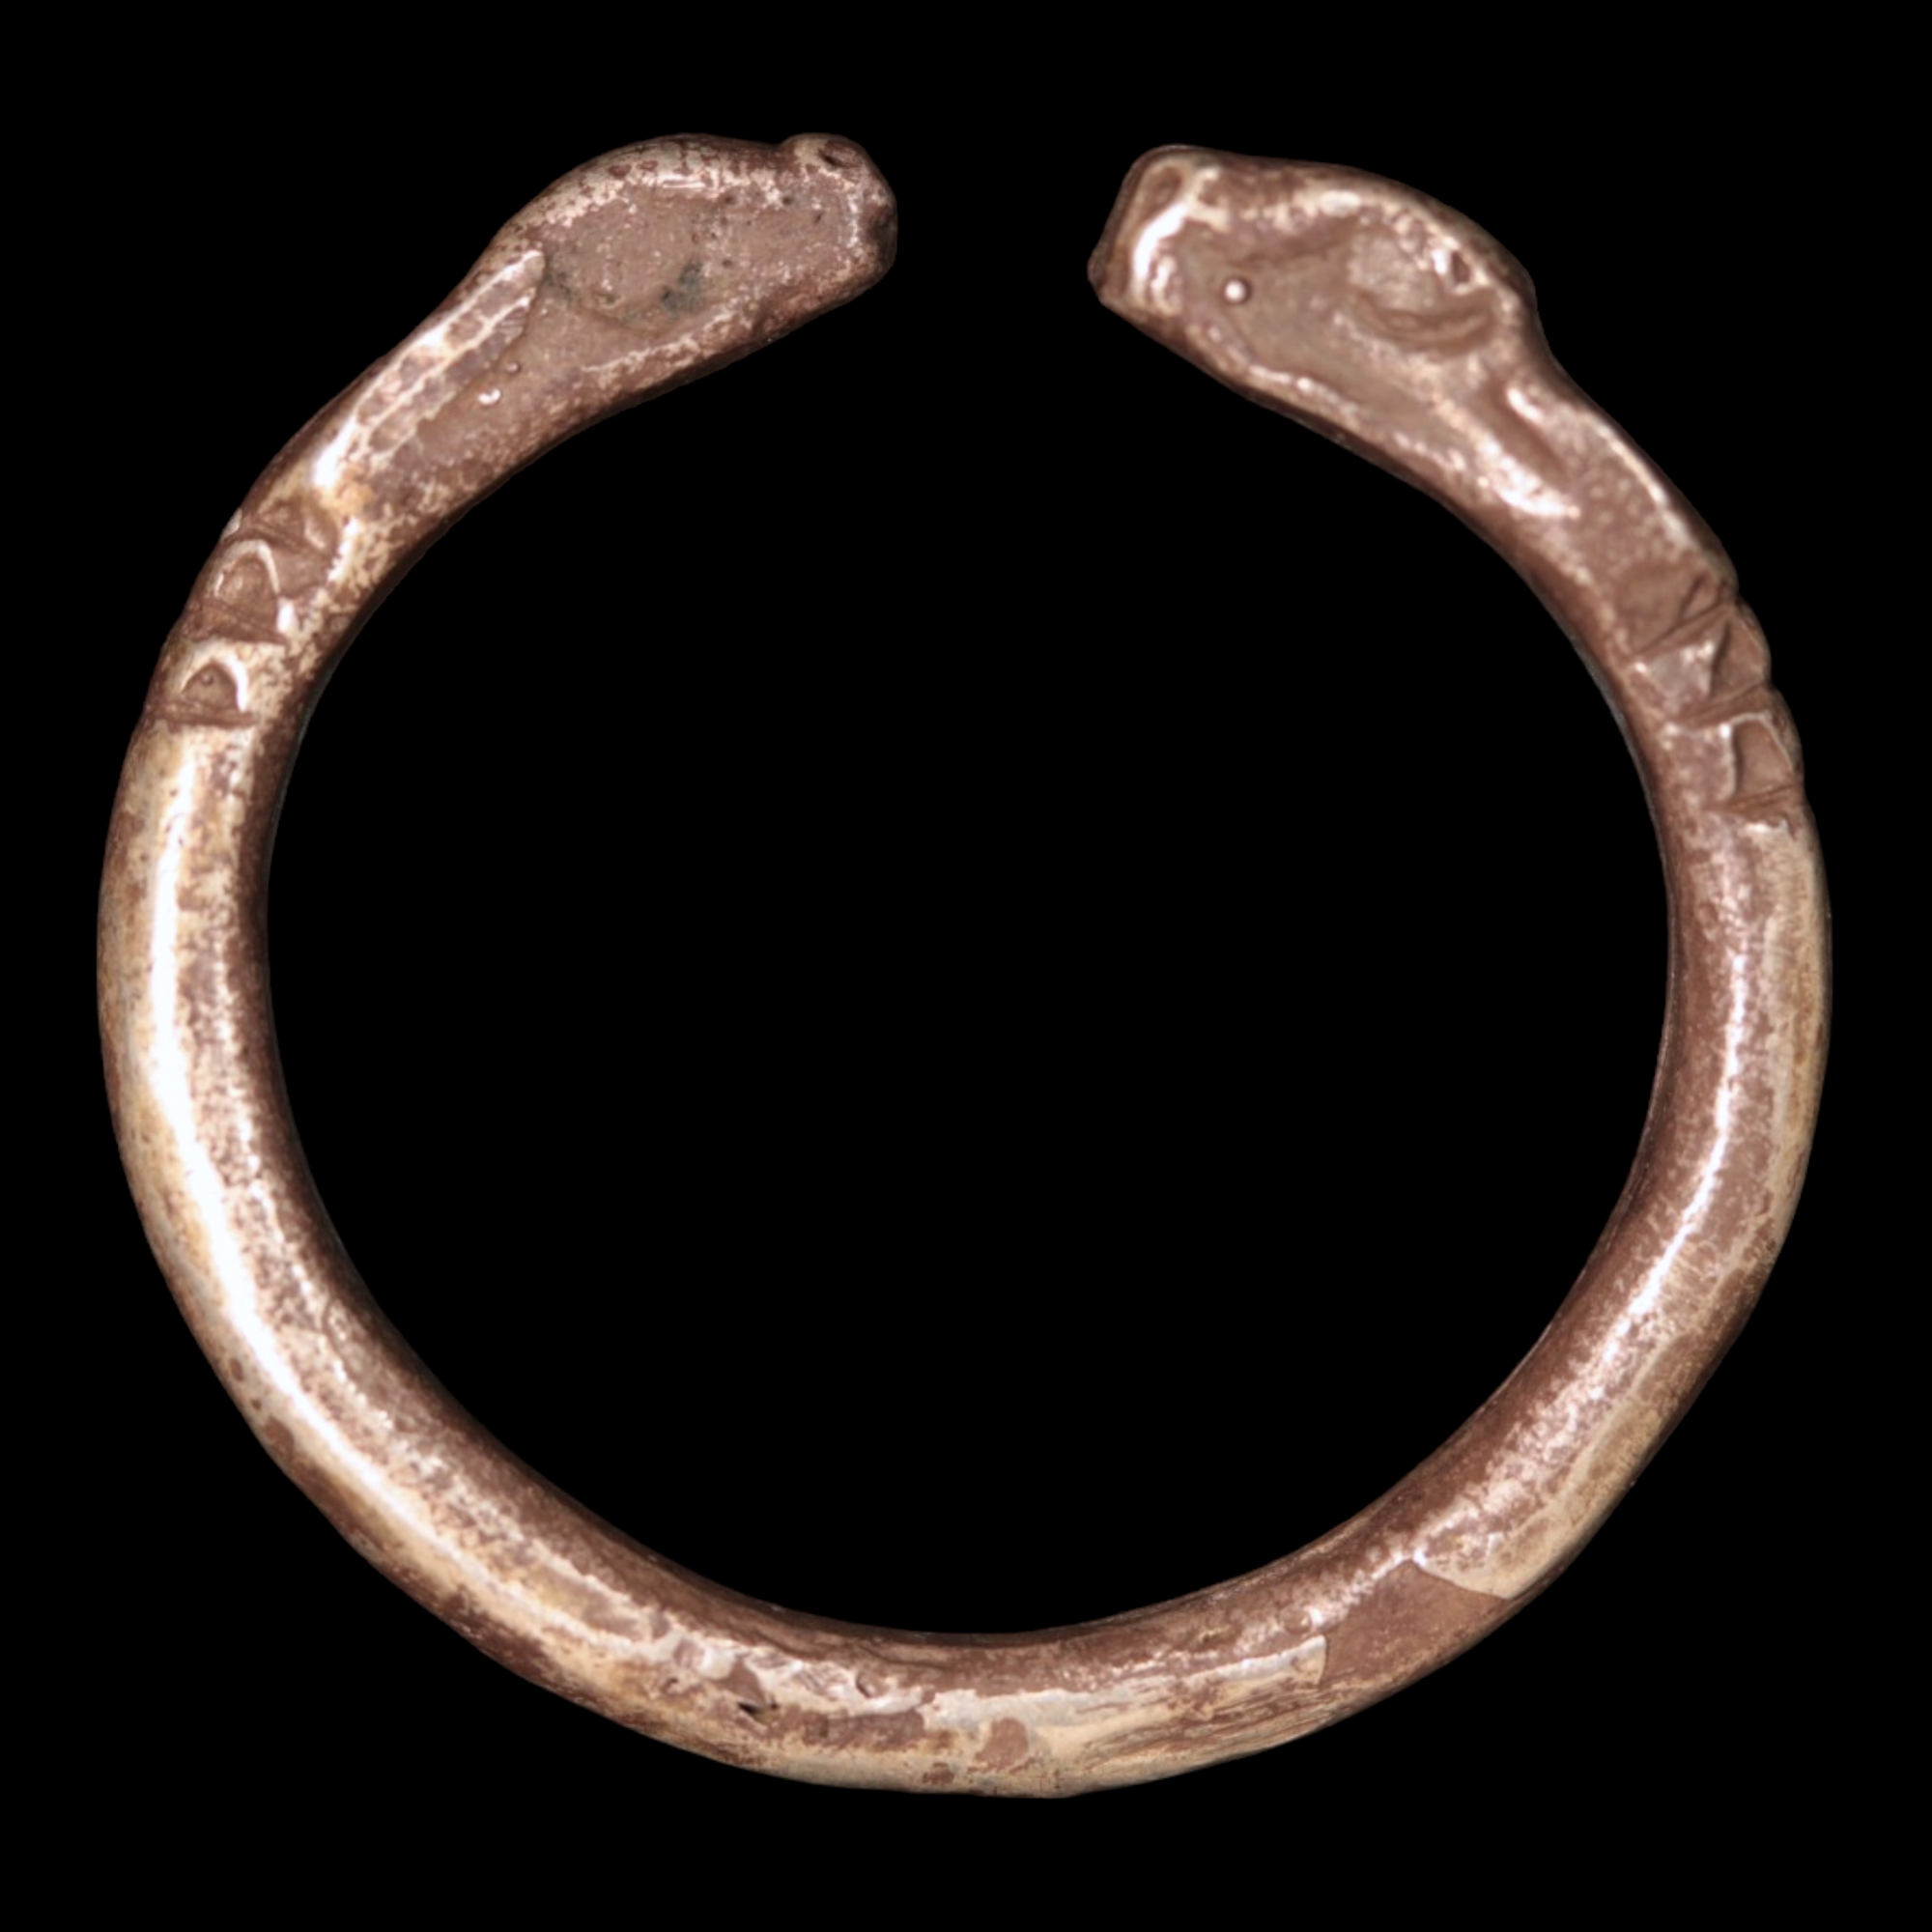 Achaemenid Empire, Serpent Headed Silver Ring - c. 530 to 350 BCE - Ancient Middle East - 10/25/23 Auction